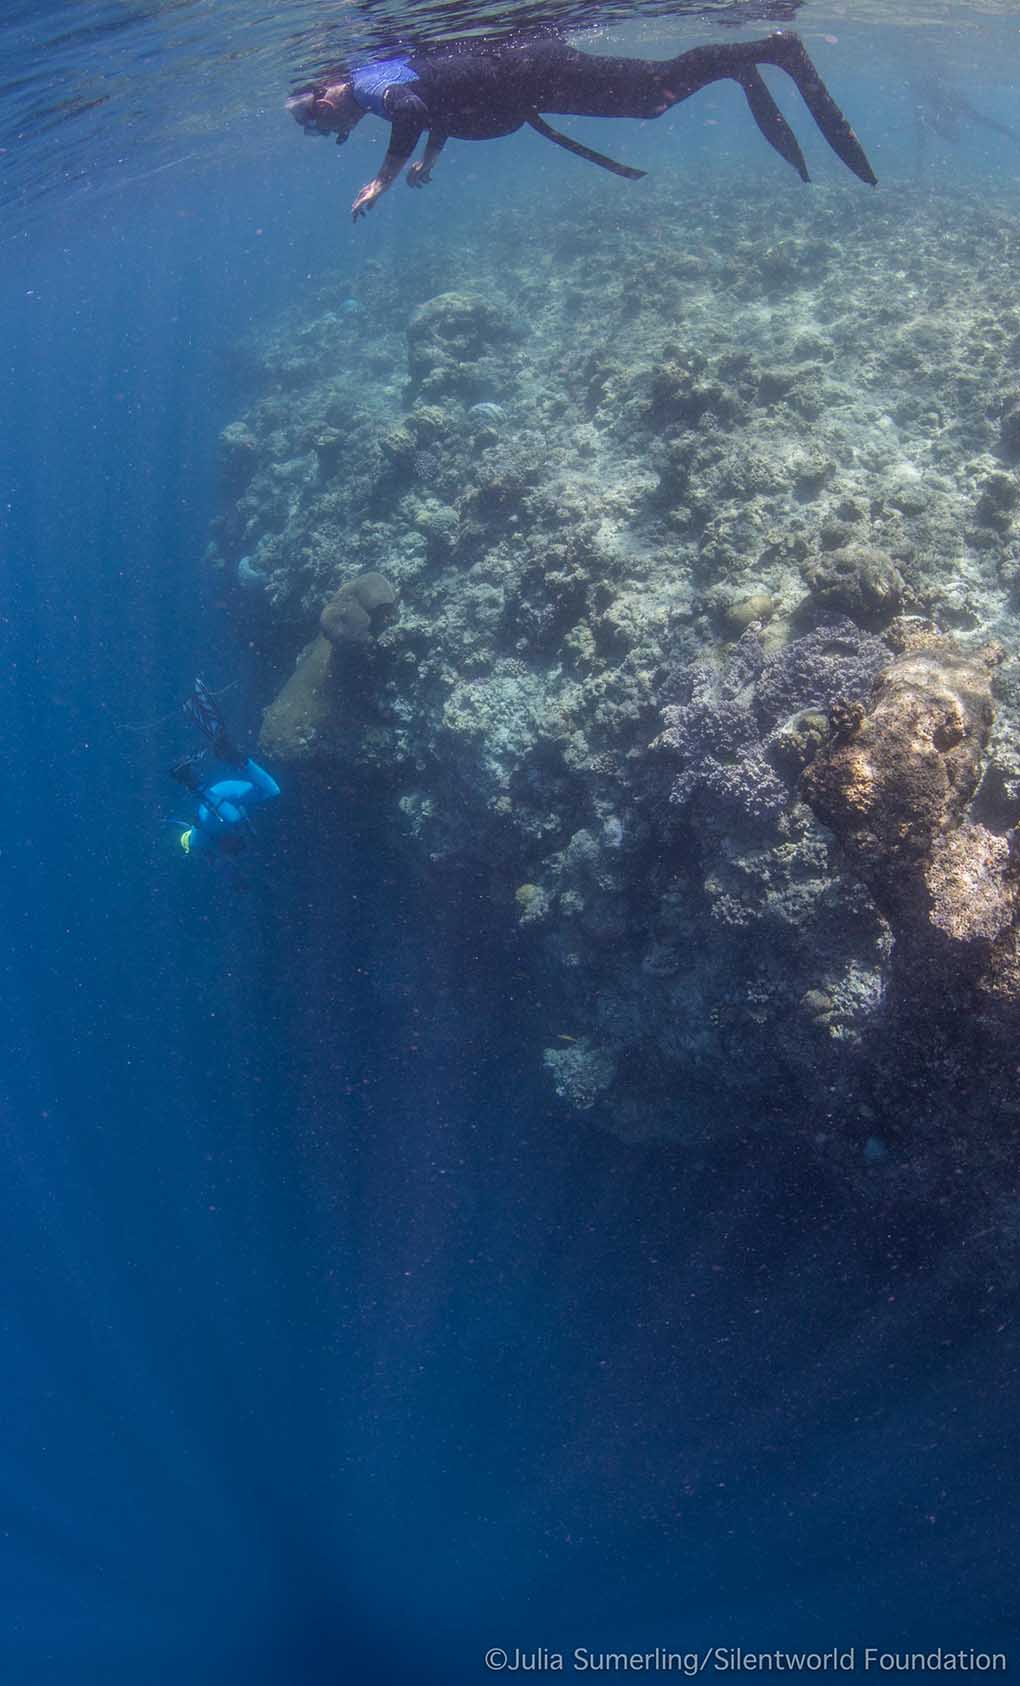 The seafloor at Boot Reef rises rapidly from over 1,000 metres to approximately one metre depth. In some places—such as this wall along the western side of the ‘isthmus’—the reef literally drops away vertically into the abyss. Image: Julia Sumerling/Silentworld Foundation.